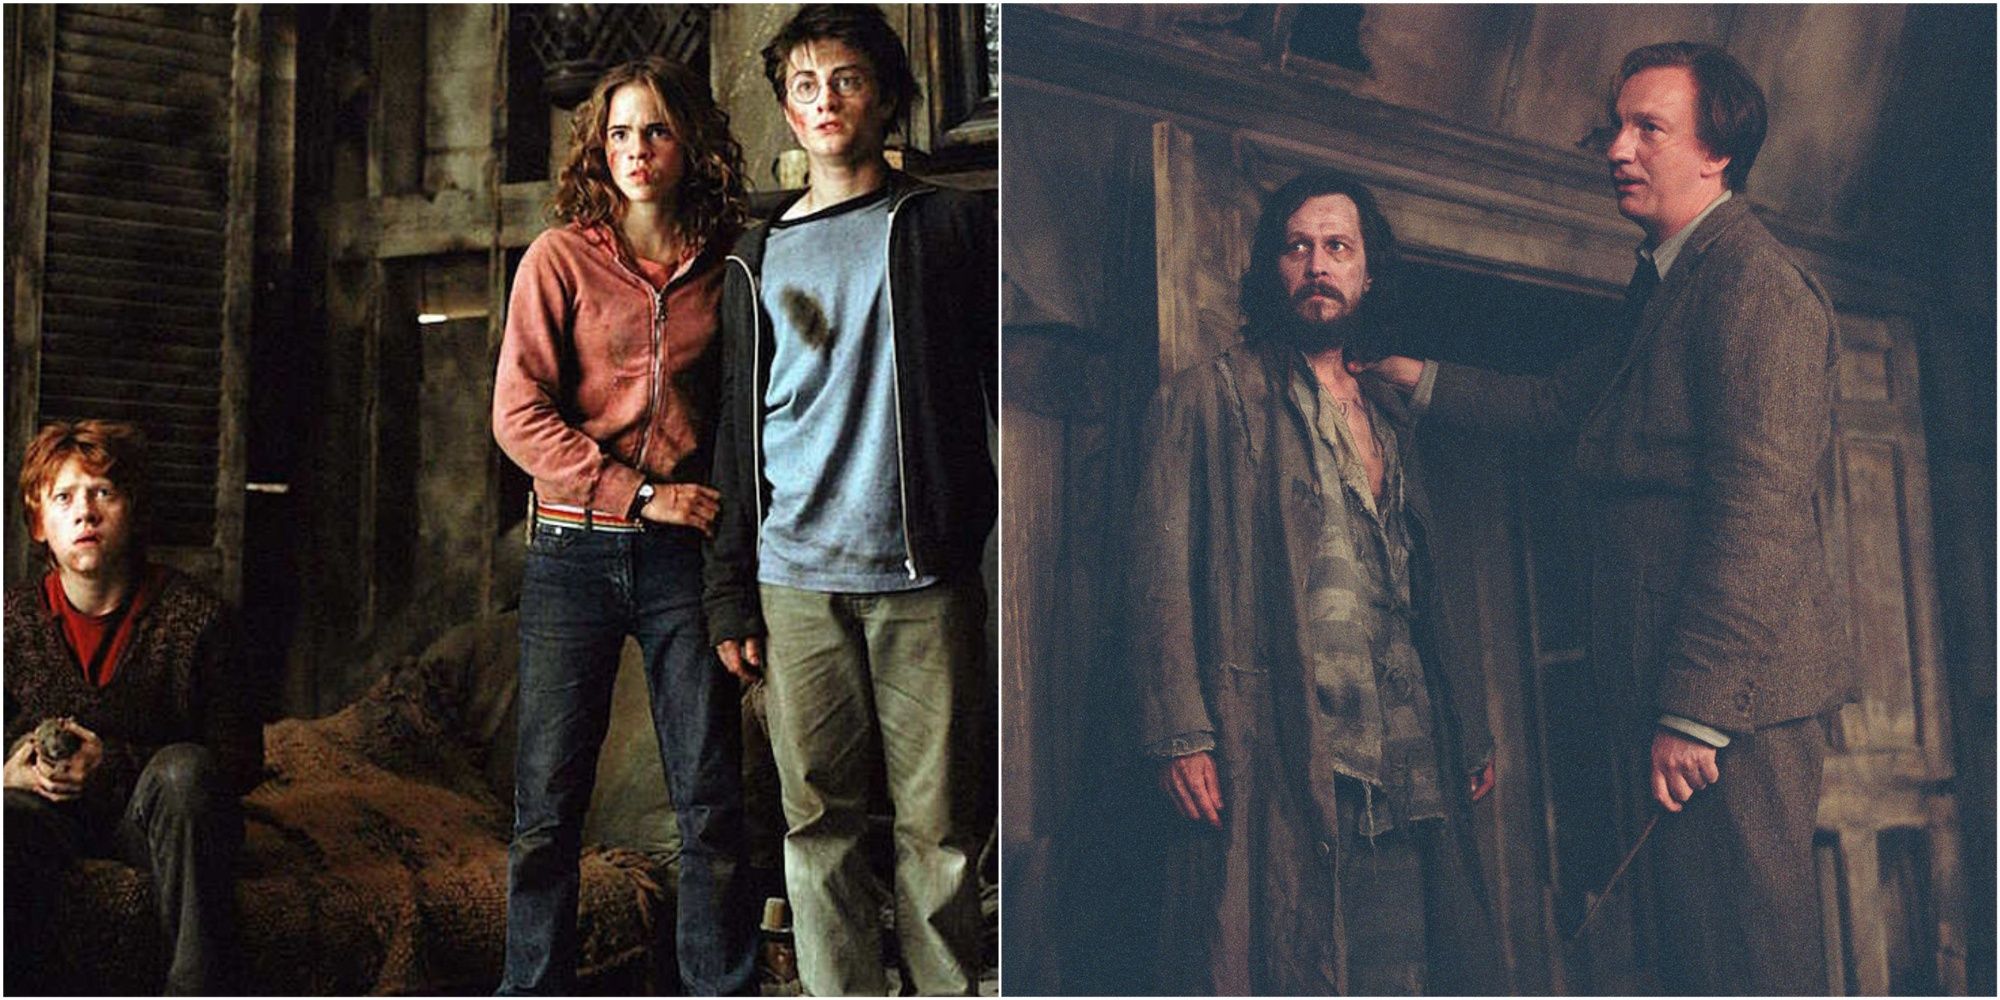 Split image of the Trio, Sirius Black, and Remus Lupin in Harry Potter and the Prisoner of Azkaban.